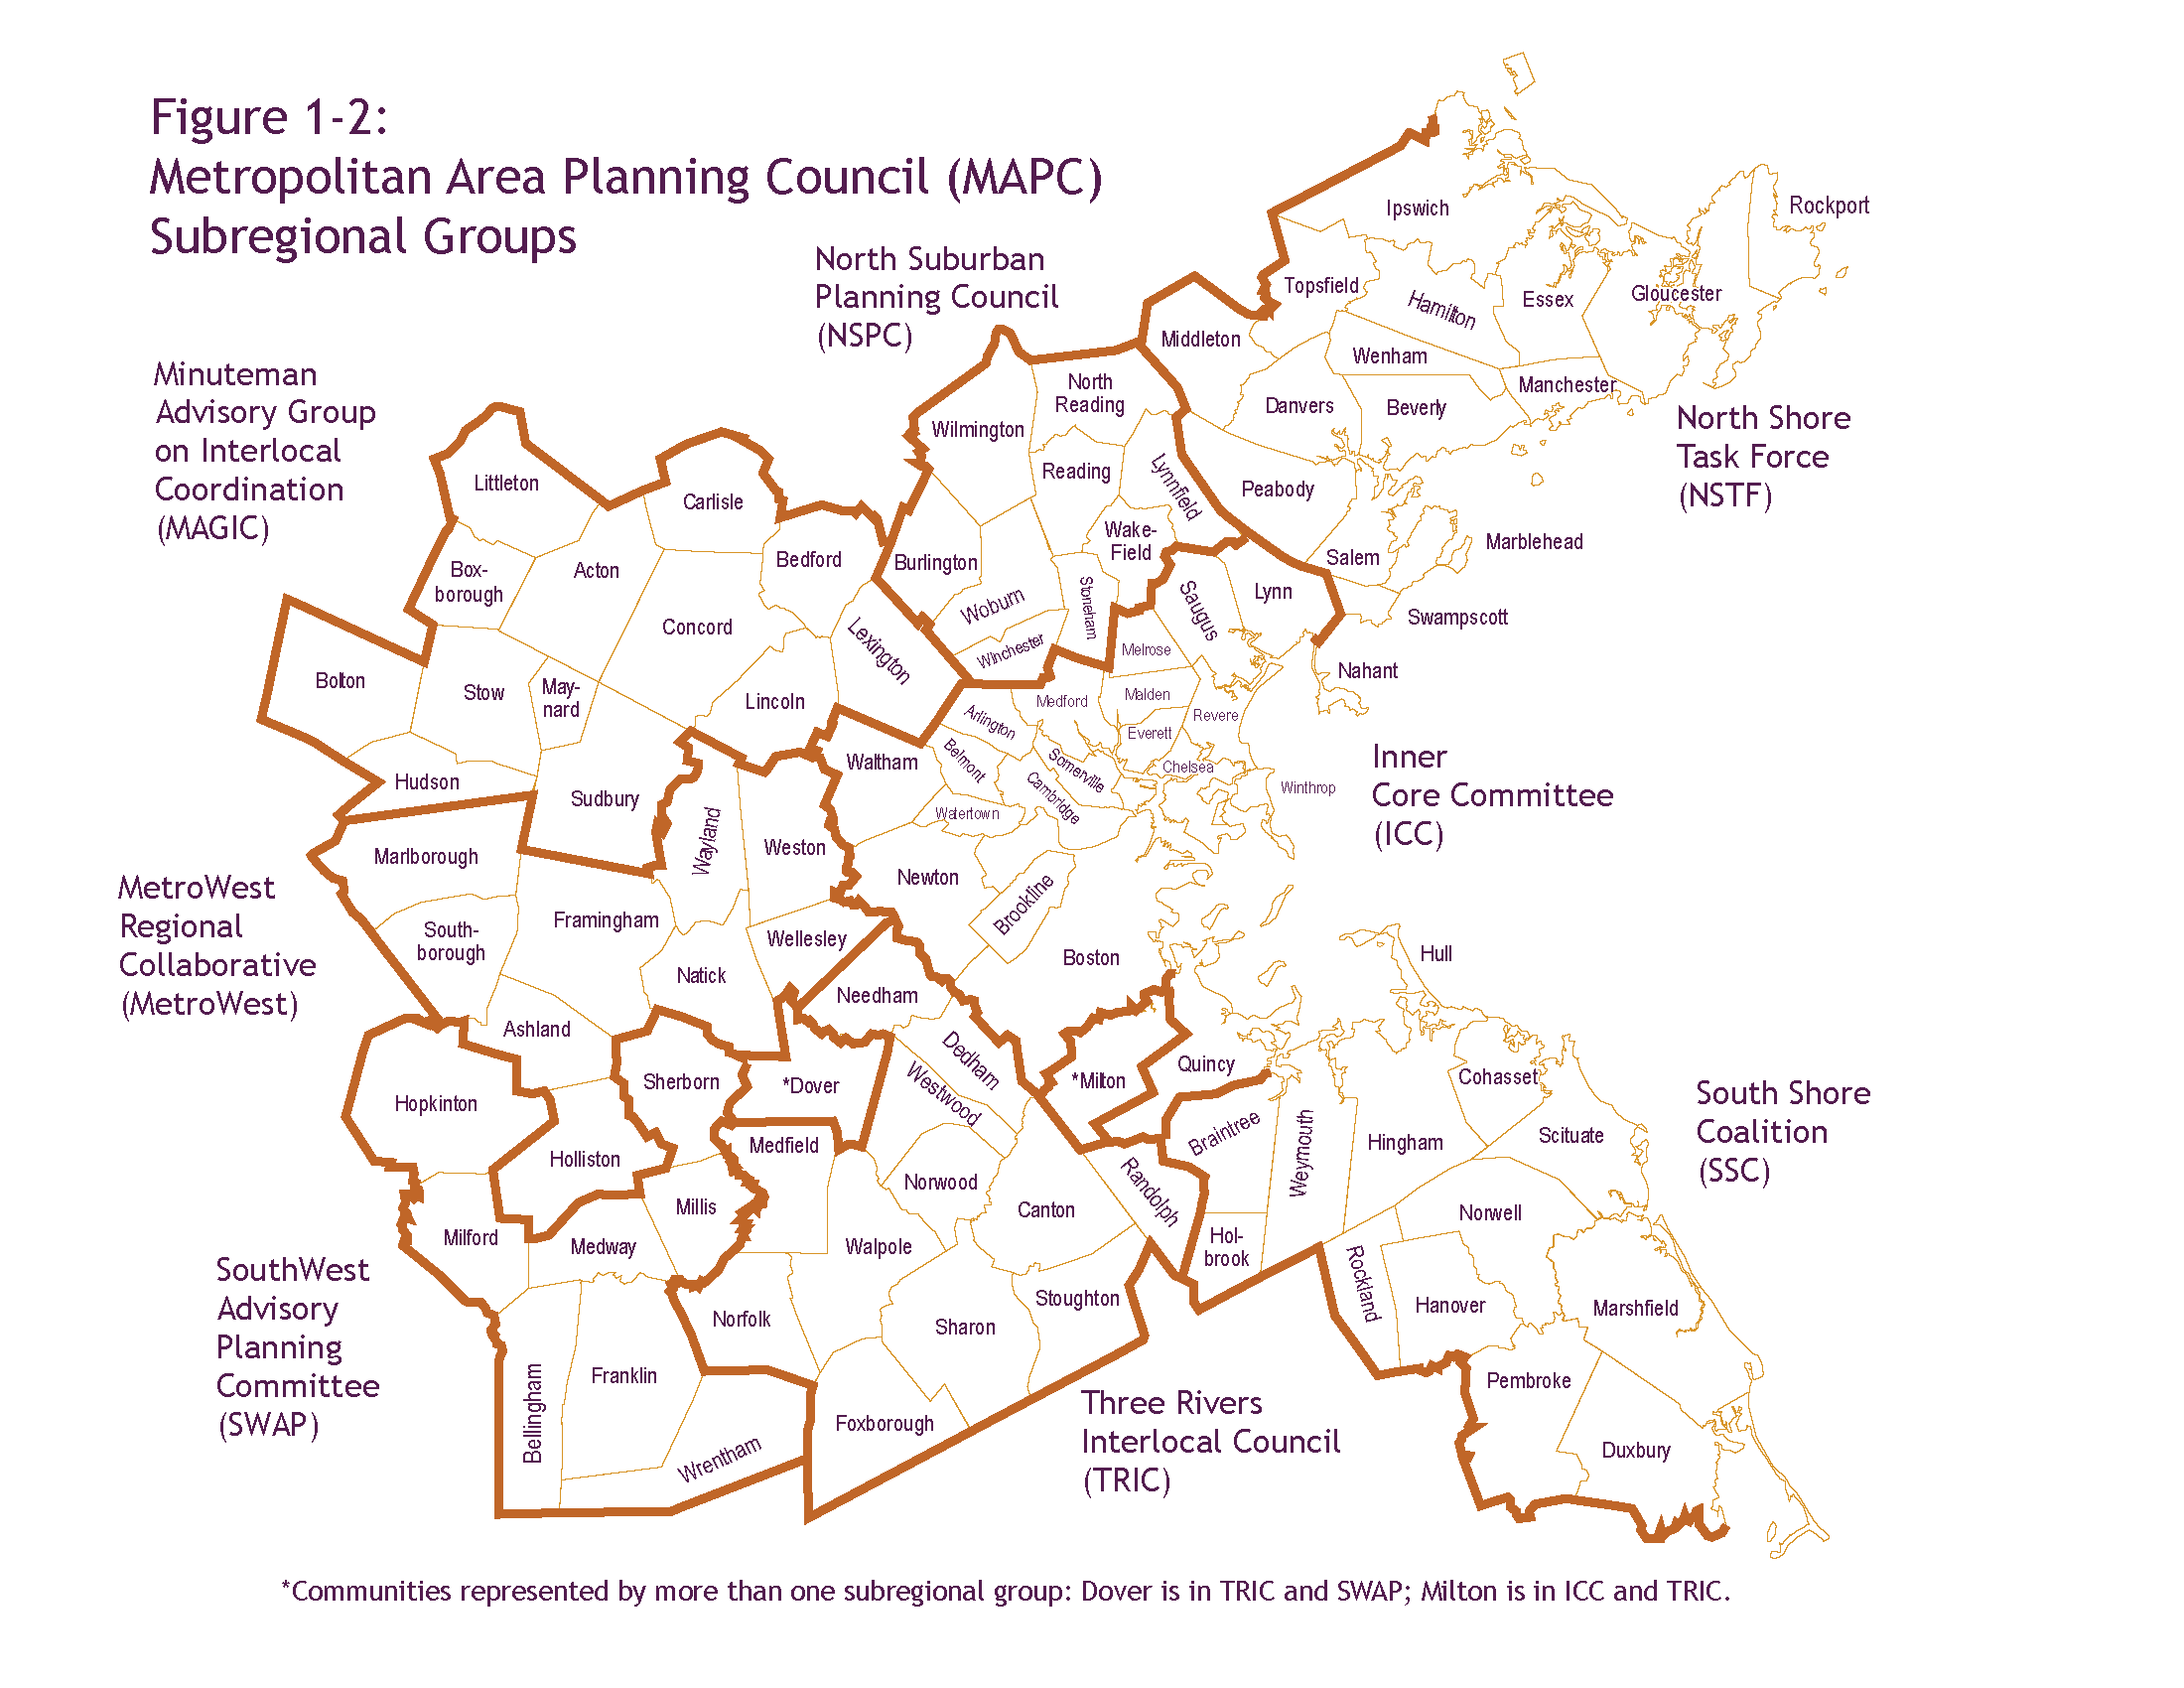 Figure 1-2: Metropolitan Area Planning Council (MAPC) Subregional Groups. This map shows how the 101 municipalities in the Boston Region MPO region are located in eight MAPC subregions, which are represented by subregional groups. These subregional groups include the Inner Core Committee (ICC), the MetroWest Regional Collaborative (MetroWest), the Minuteman Advisory Group on Interlocal Coordination (MAGIC), the North Suburban Planning Council (NSPC), the North Shore Task Force (NSTF), the South Shore Coalition (SSC), the SouthWest Advisory Planning Committee (SWAP), and the Three Rivers Interlocal Council (TRIC). Two communities are represented by more than one subregional group; Dover is in TRIC and SWAP, and Milton is in ICC and TRIC.